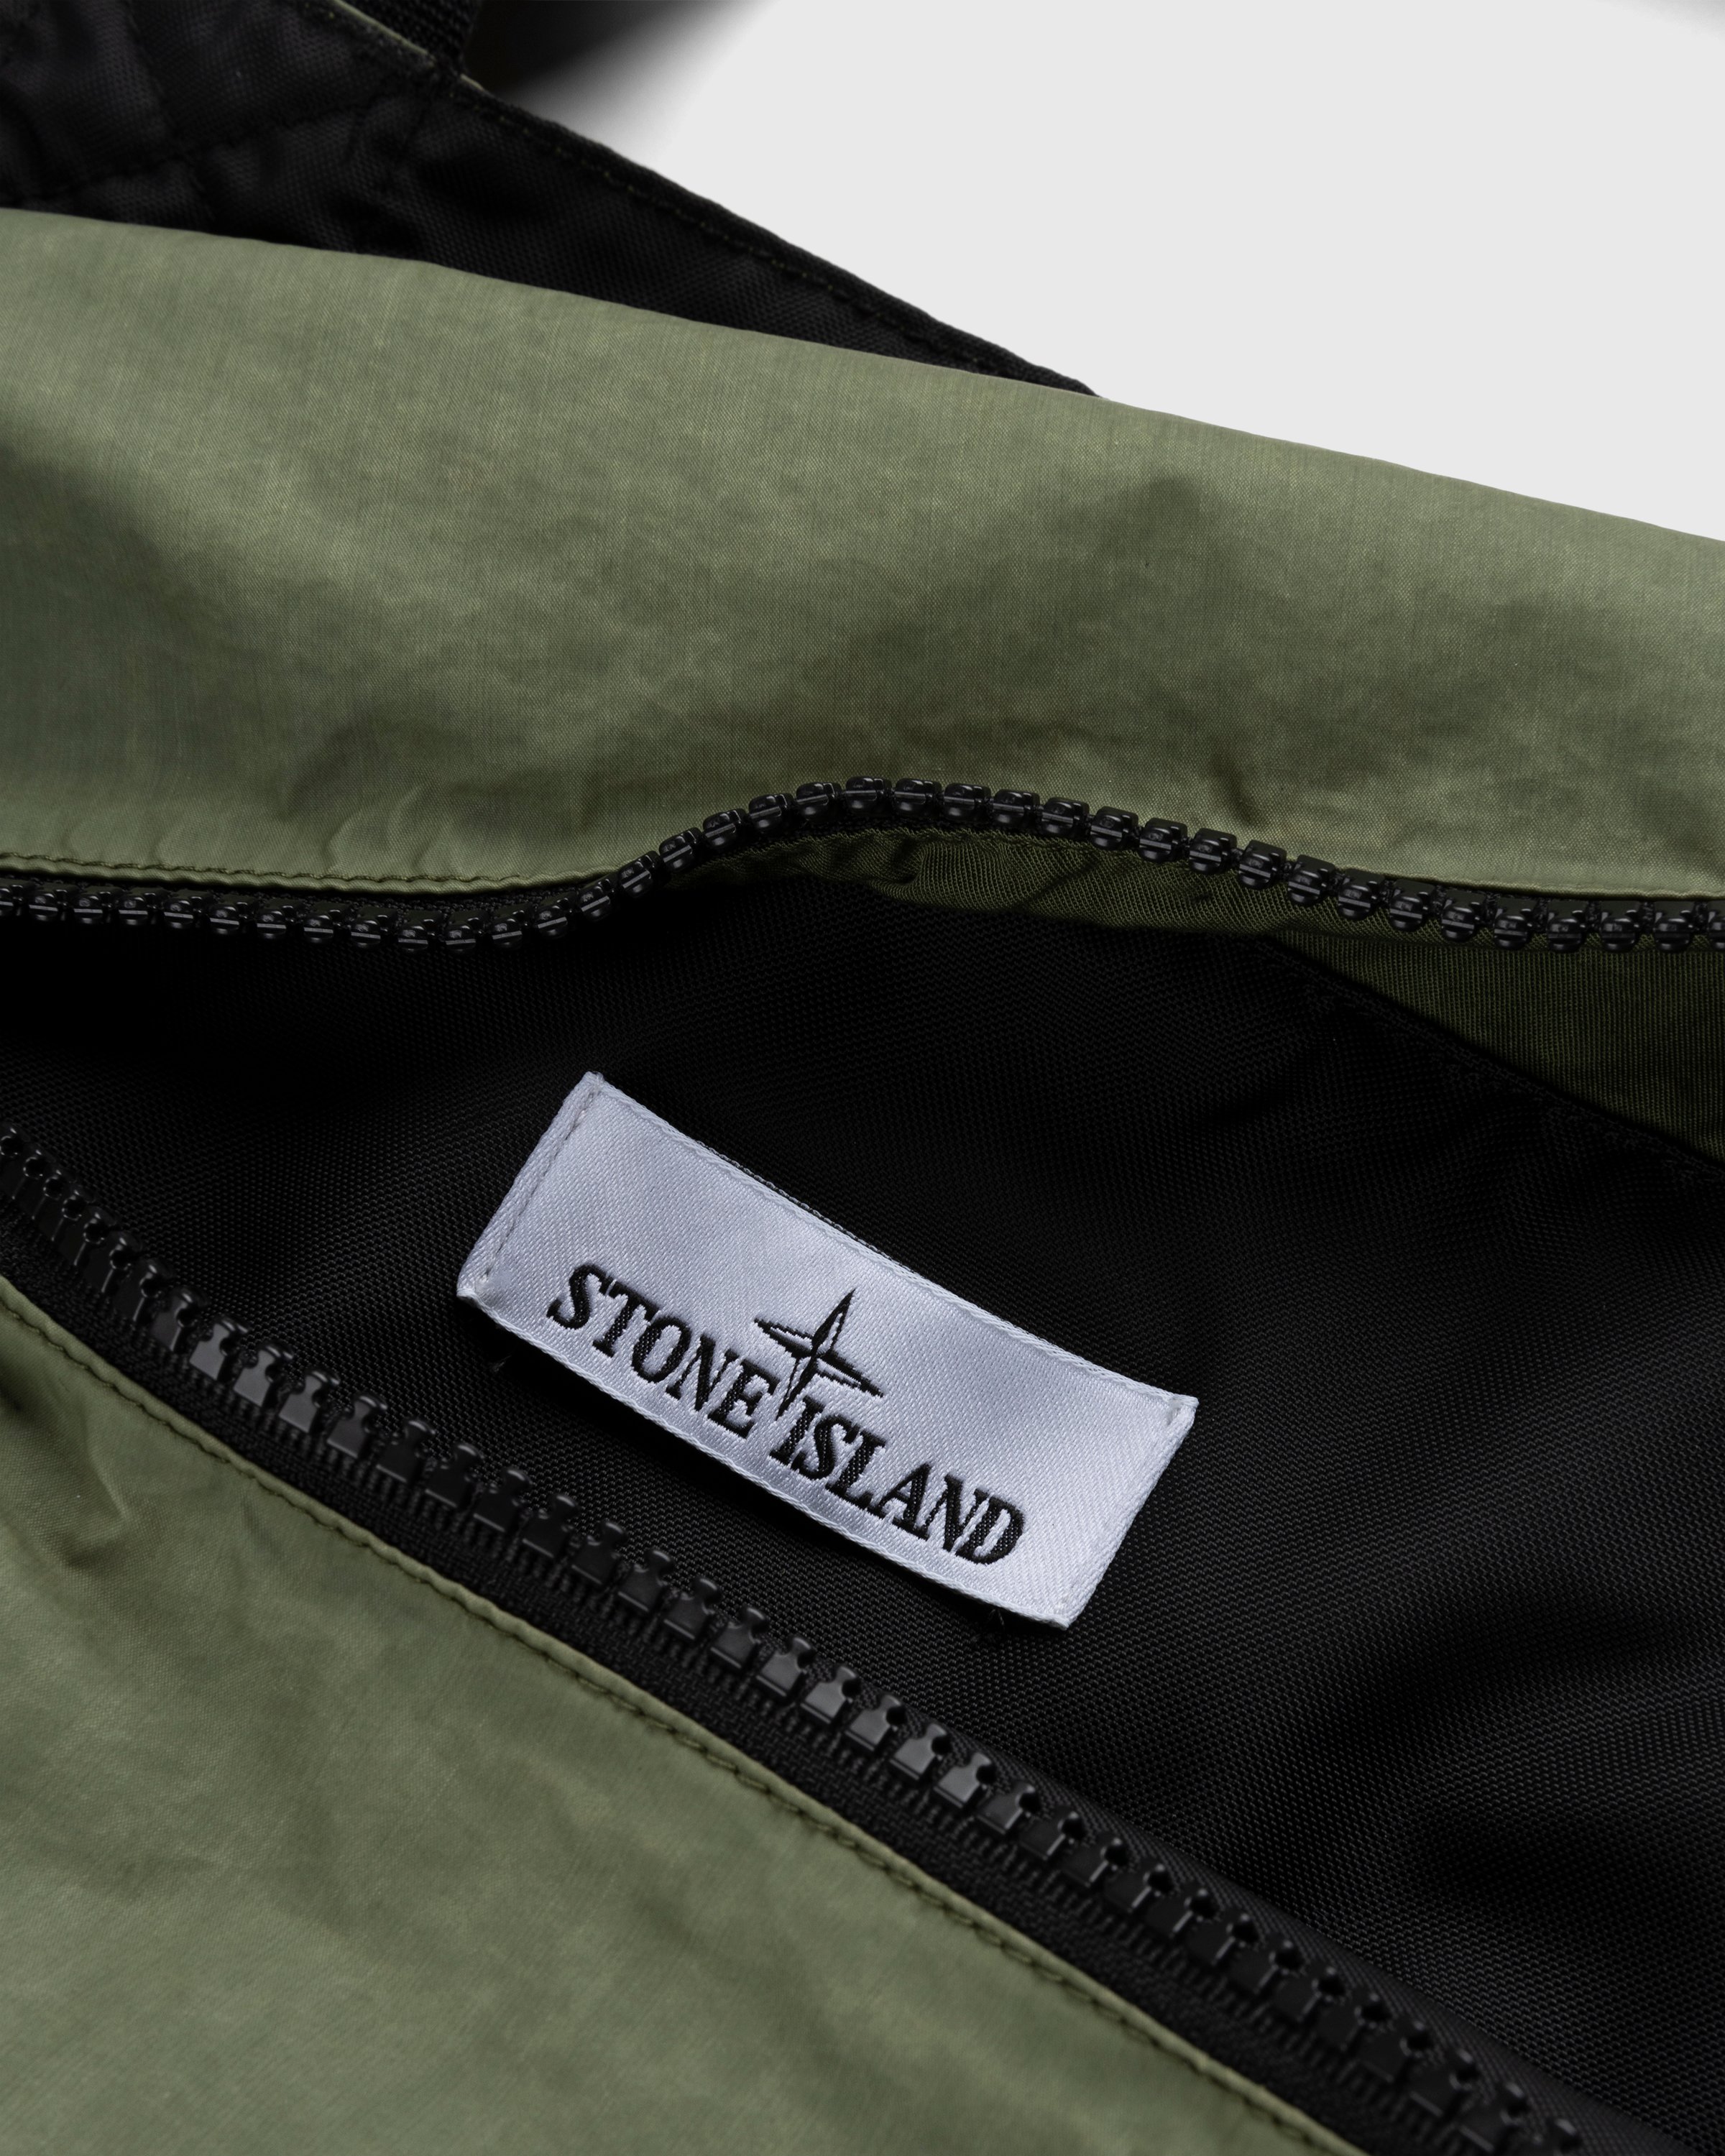 Stone Island - 91475 Garment-Dyed Tote Bag Olive - Accessories - Green - Image 5